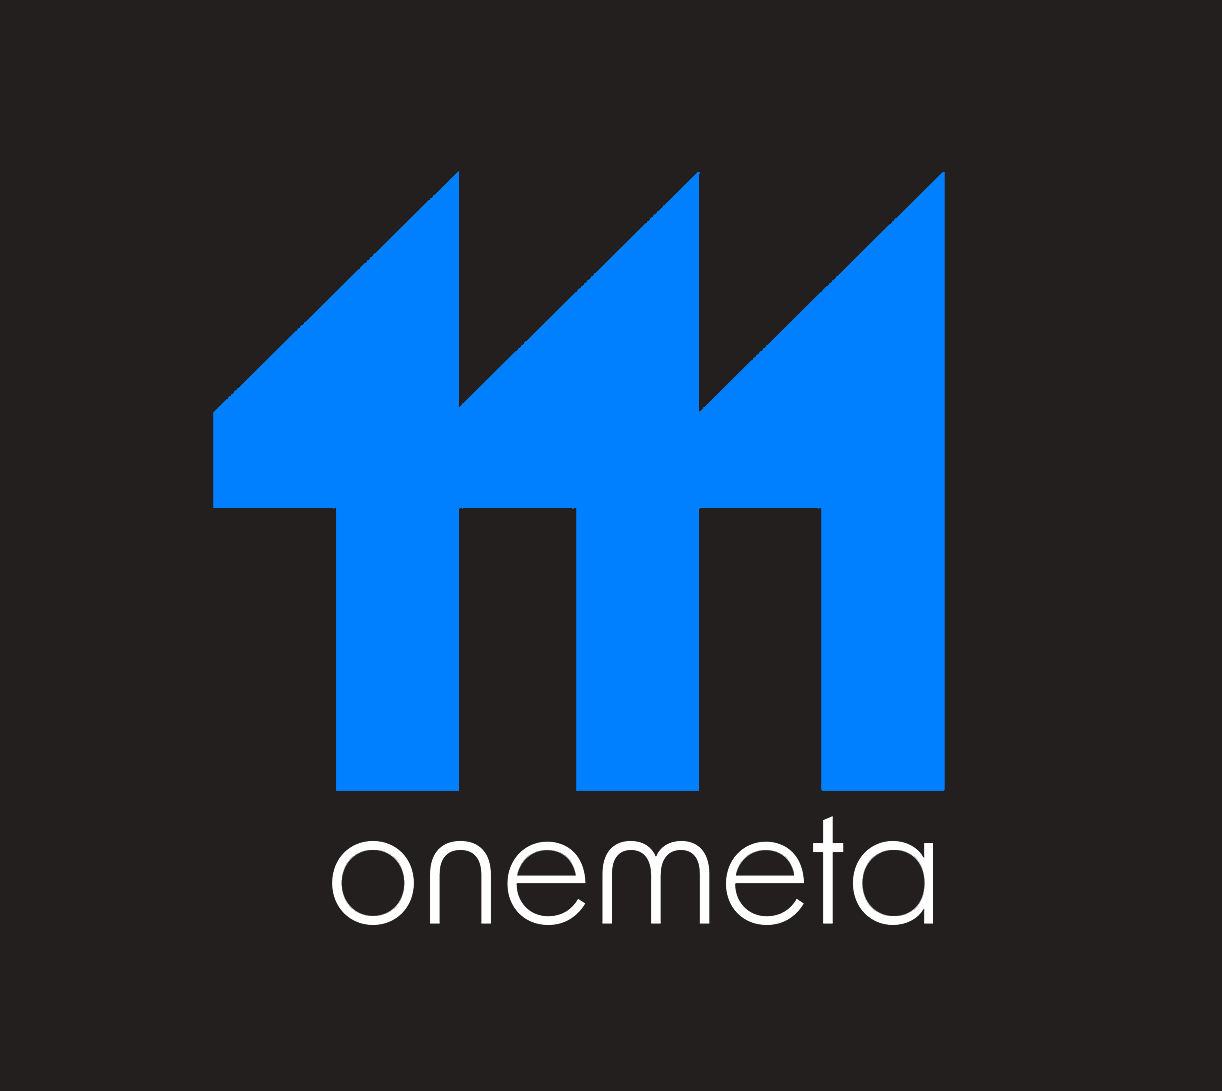 OneMeta AI Stock Soars After Its Verbum Translation App Shows Dominant Performance At IACSDG Conference ($ONEI)